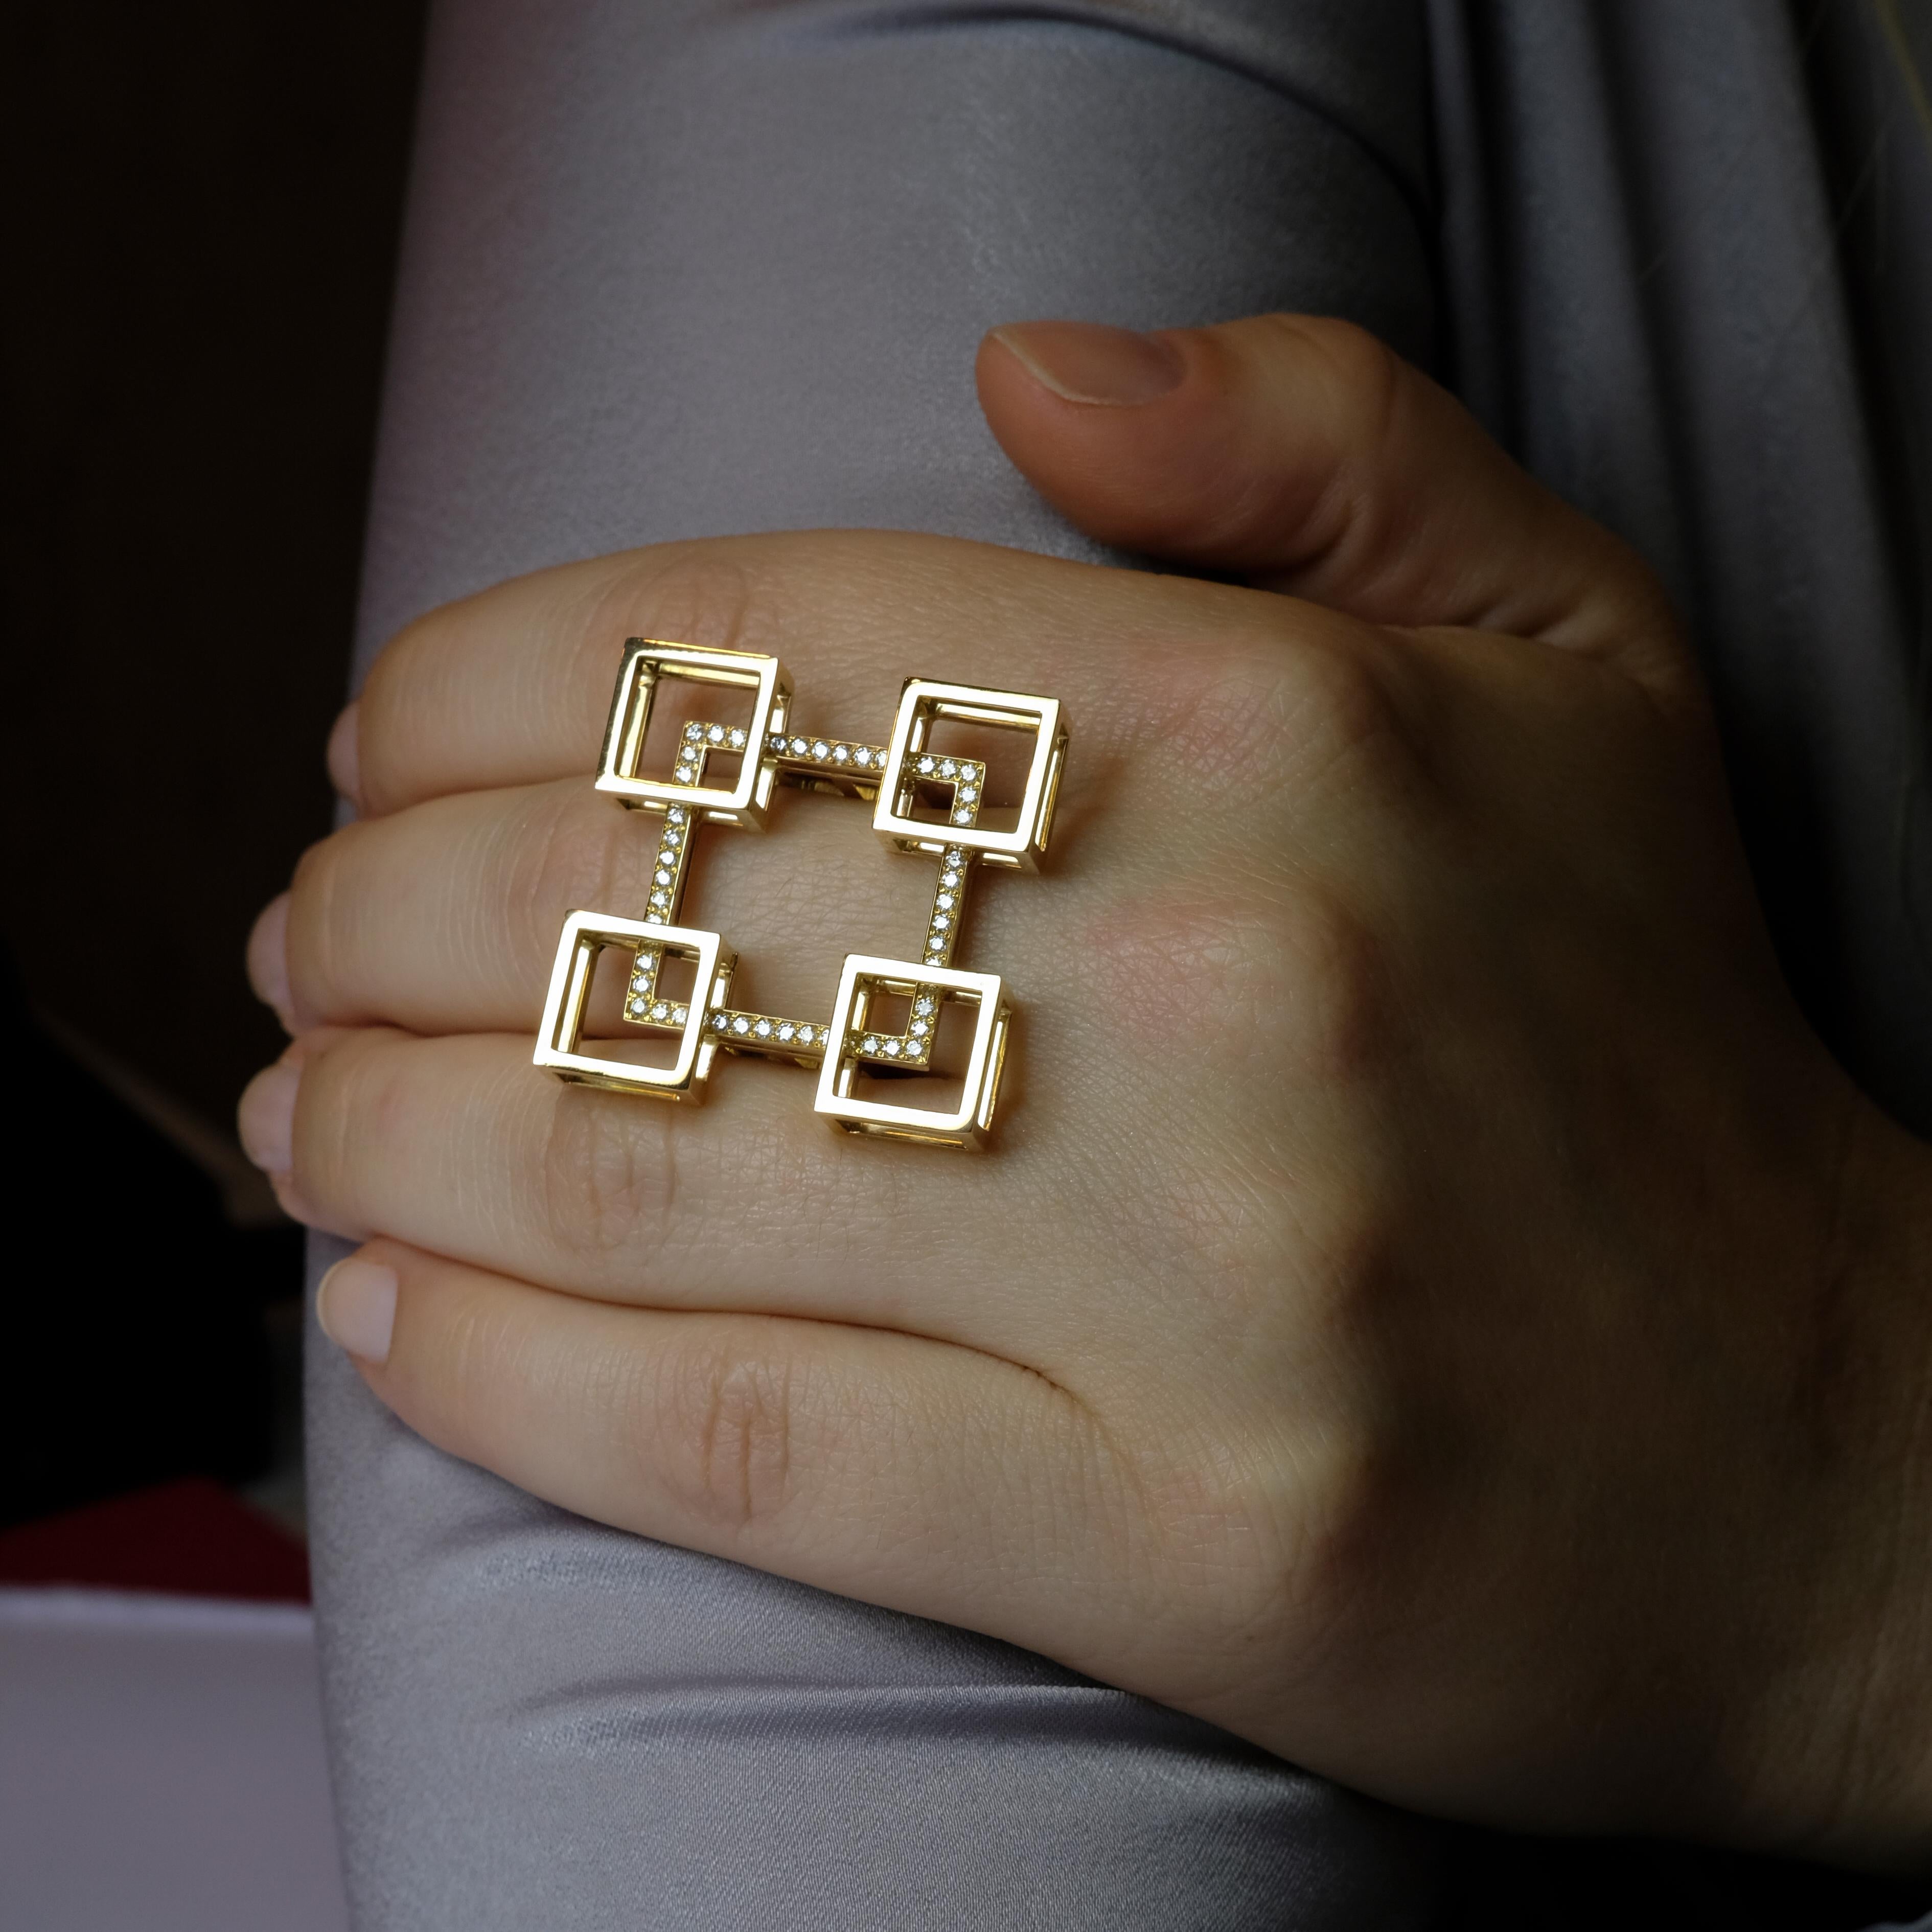 This cocktail ring is inspired by modern architecture.
Crafted out of 18 karat Beige gold this ring has a total of 0,53 carat of top white vvs diamonds.
With this contemporary design Frohmann seeks to bring out the magic of jewelry by giving the